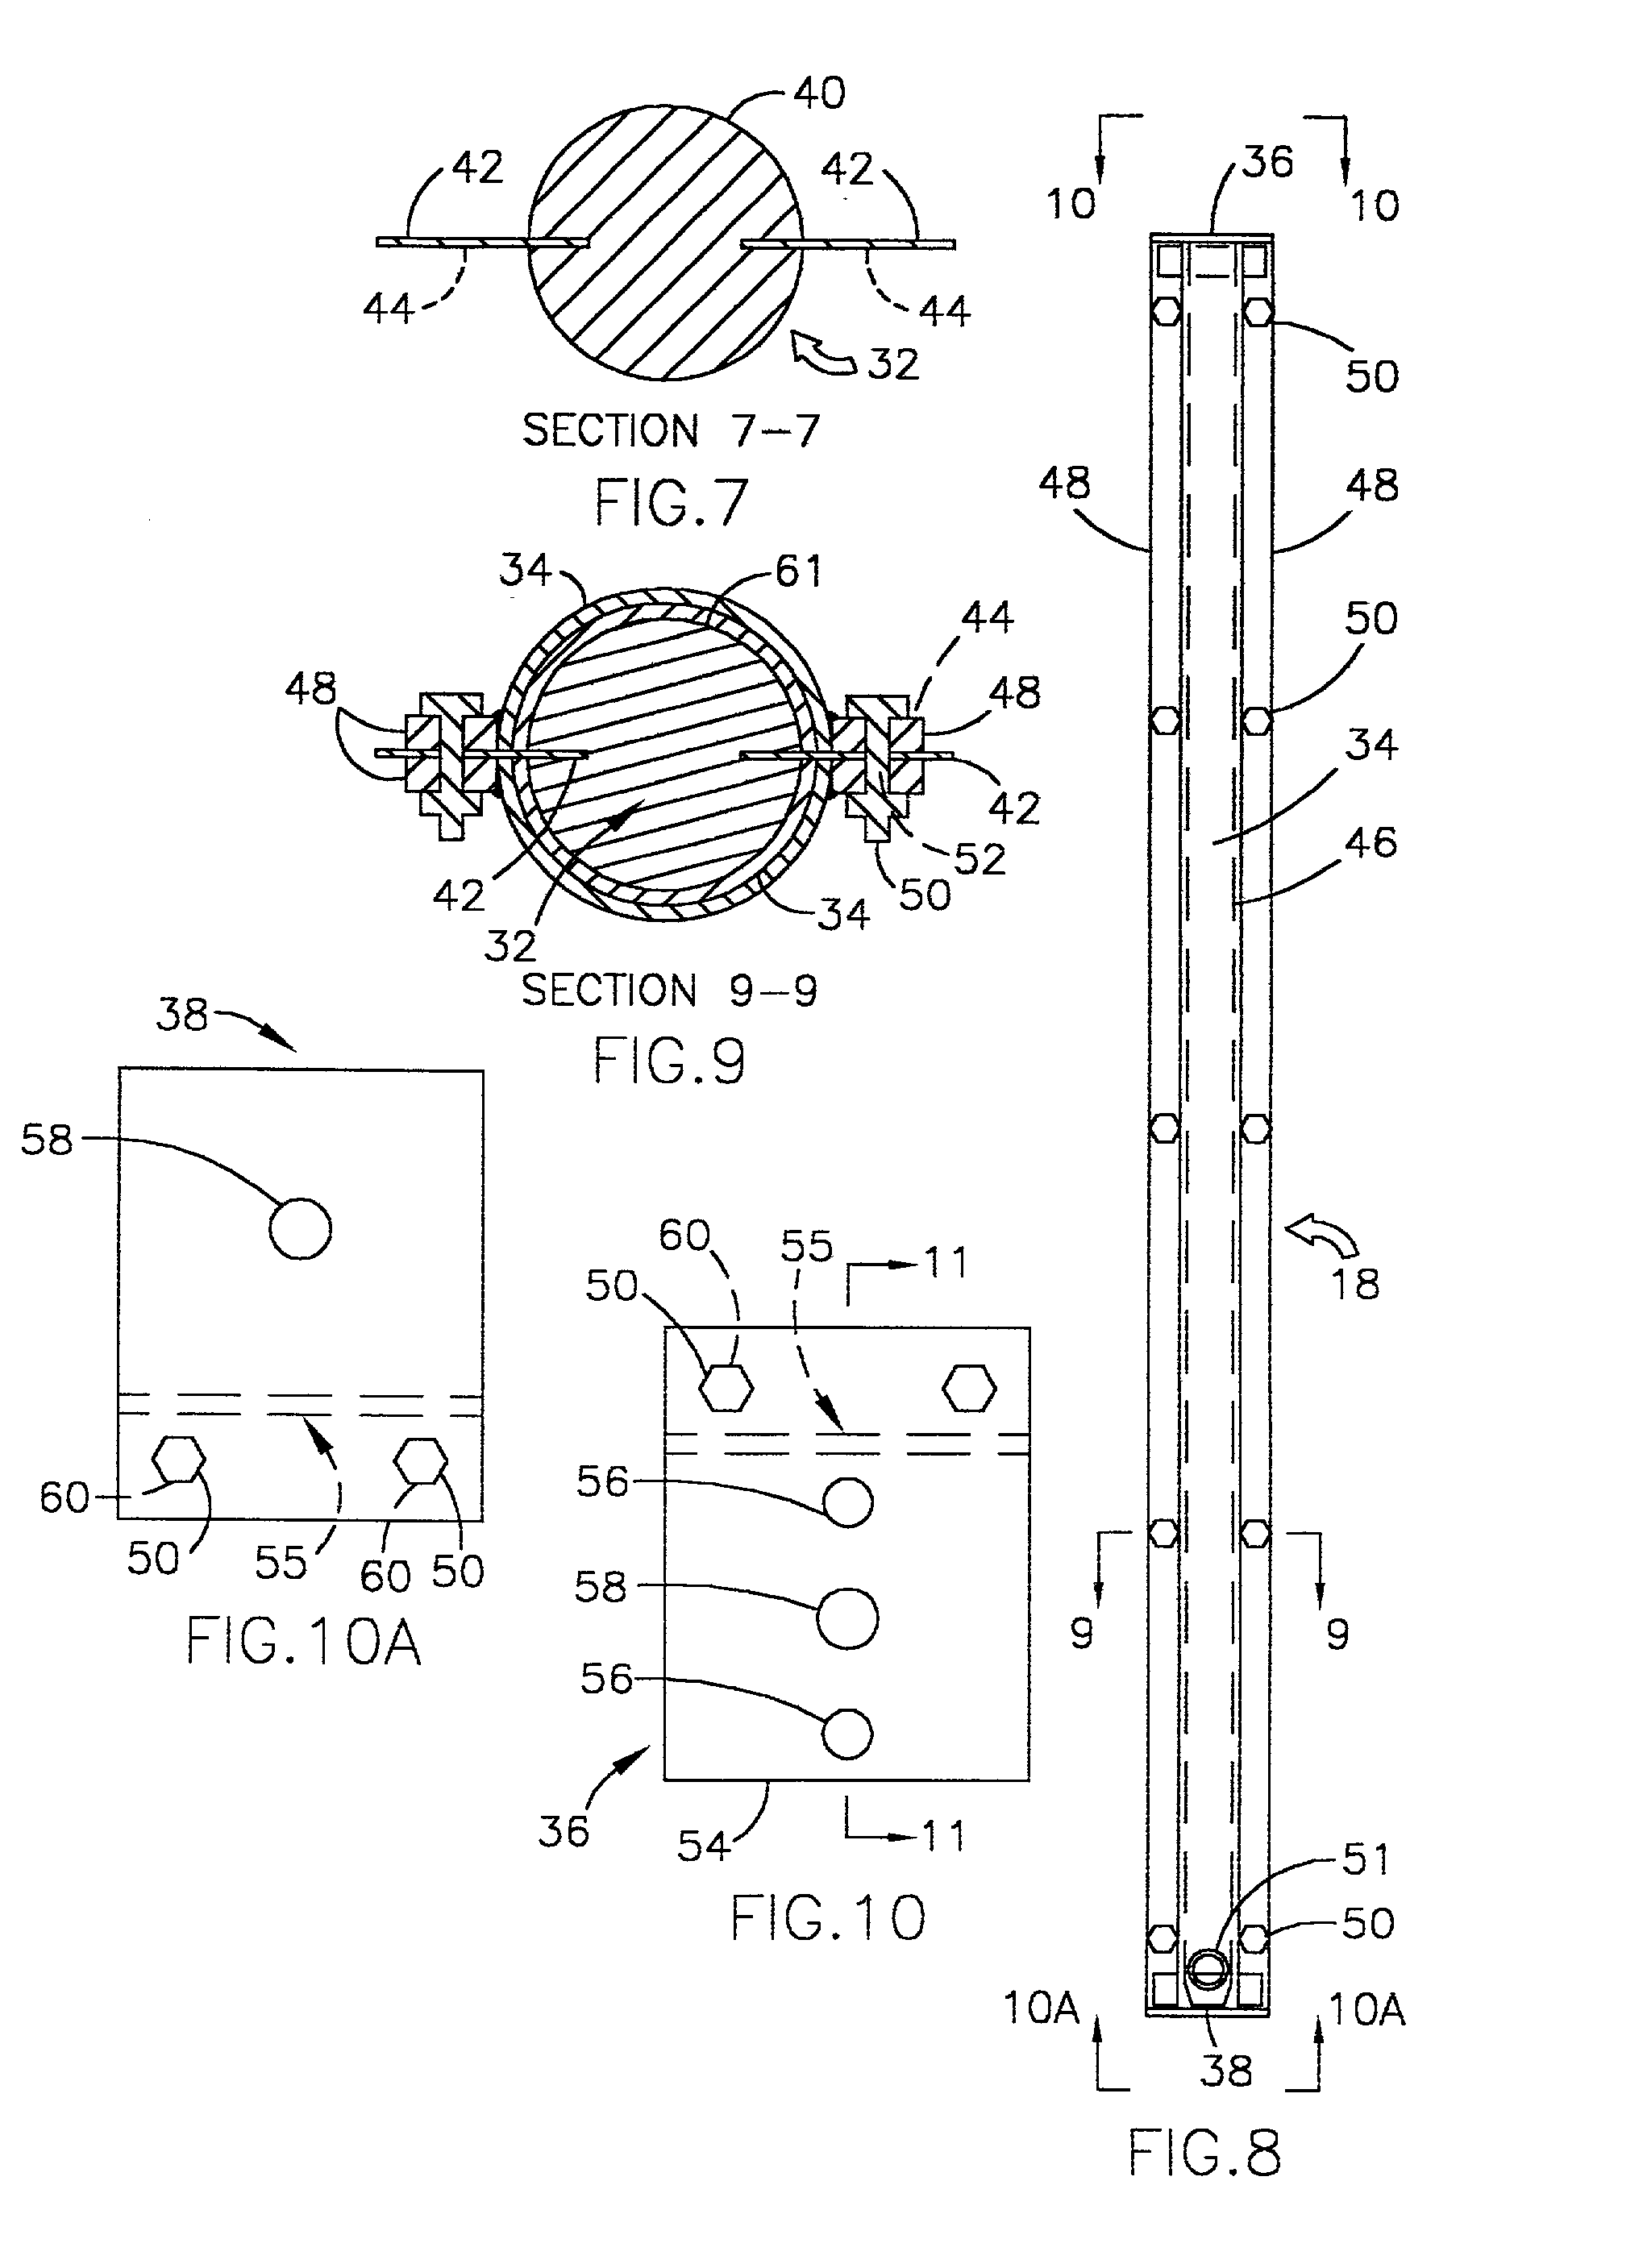 Prestressed concrete fence post assembly and method of construction